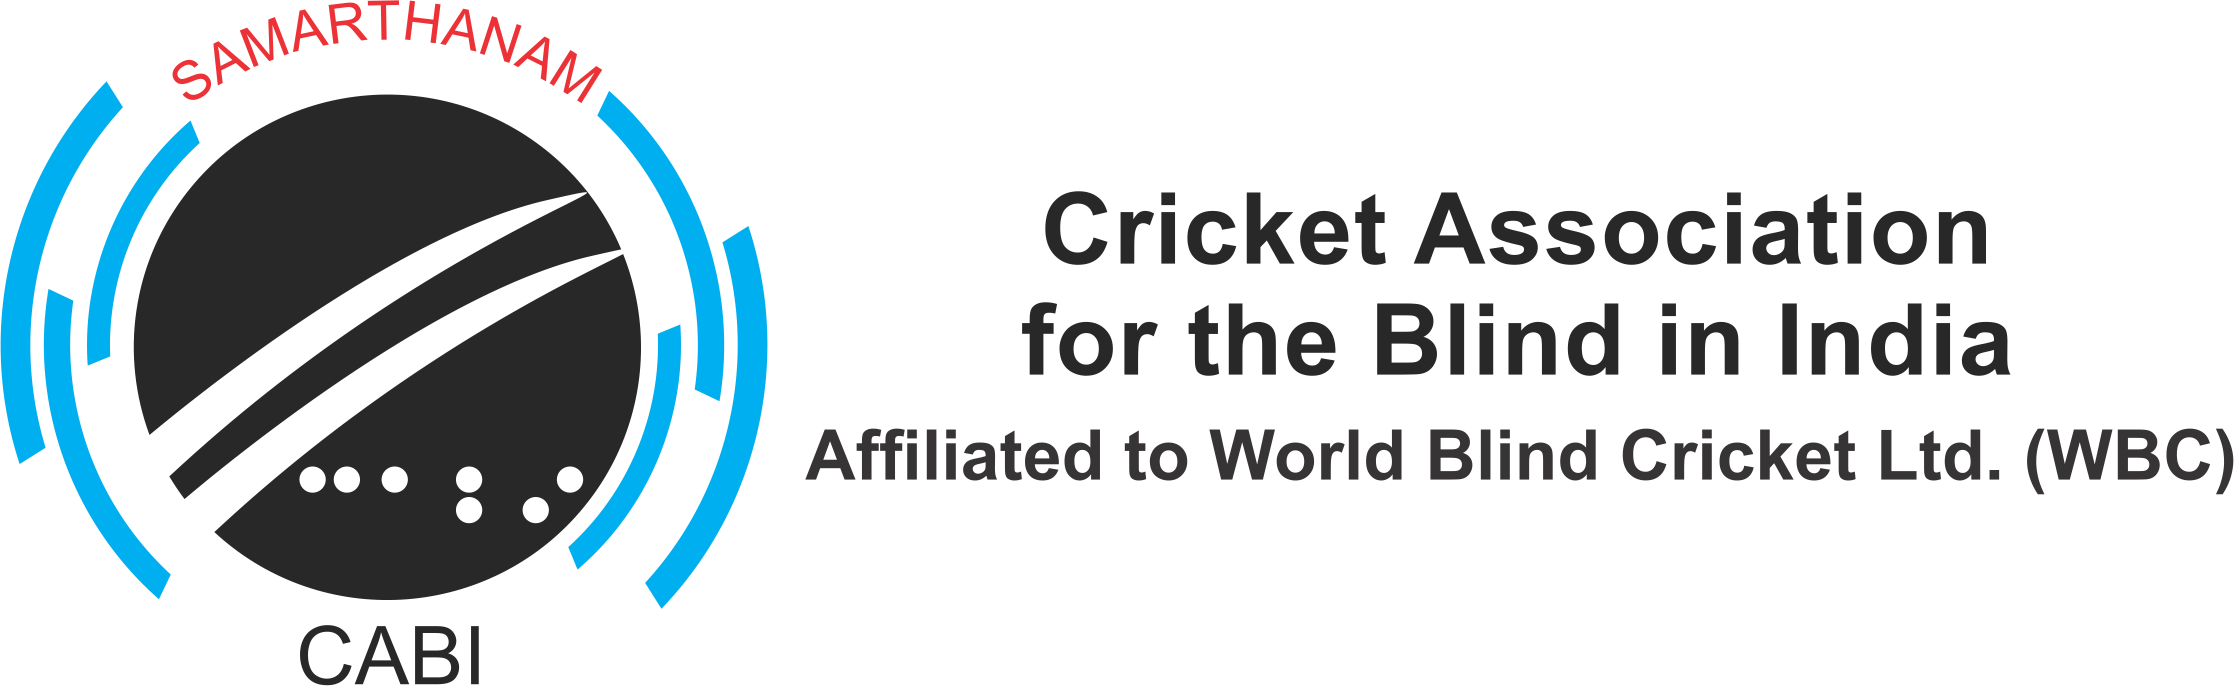 Cricket Association for Blind in India